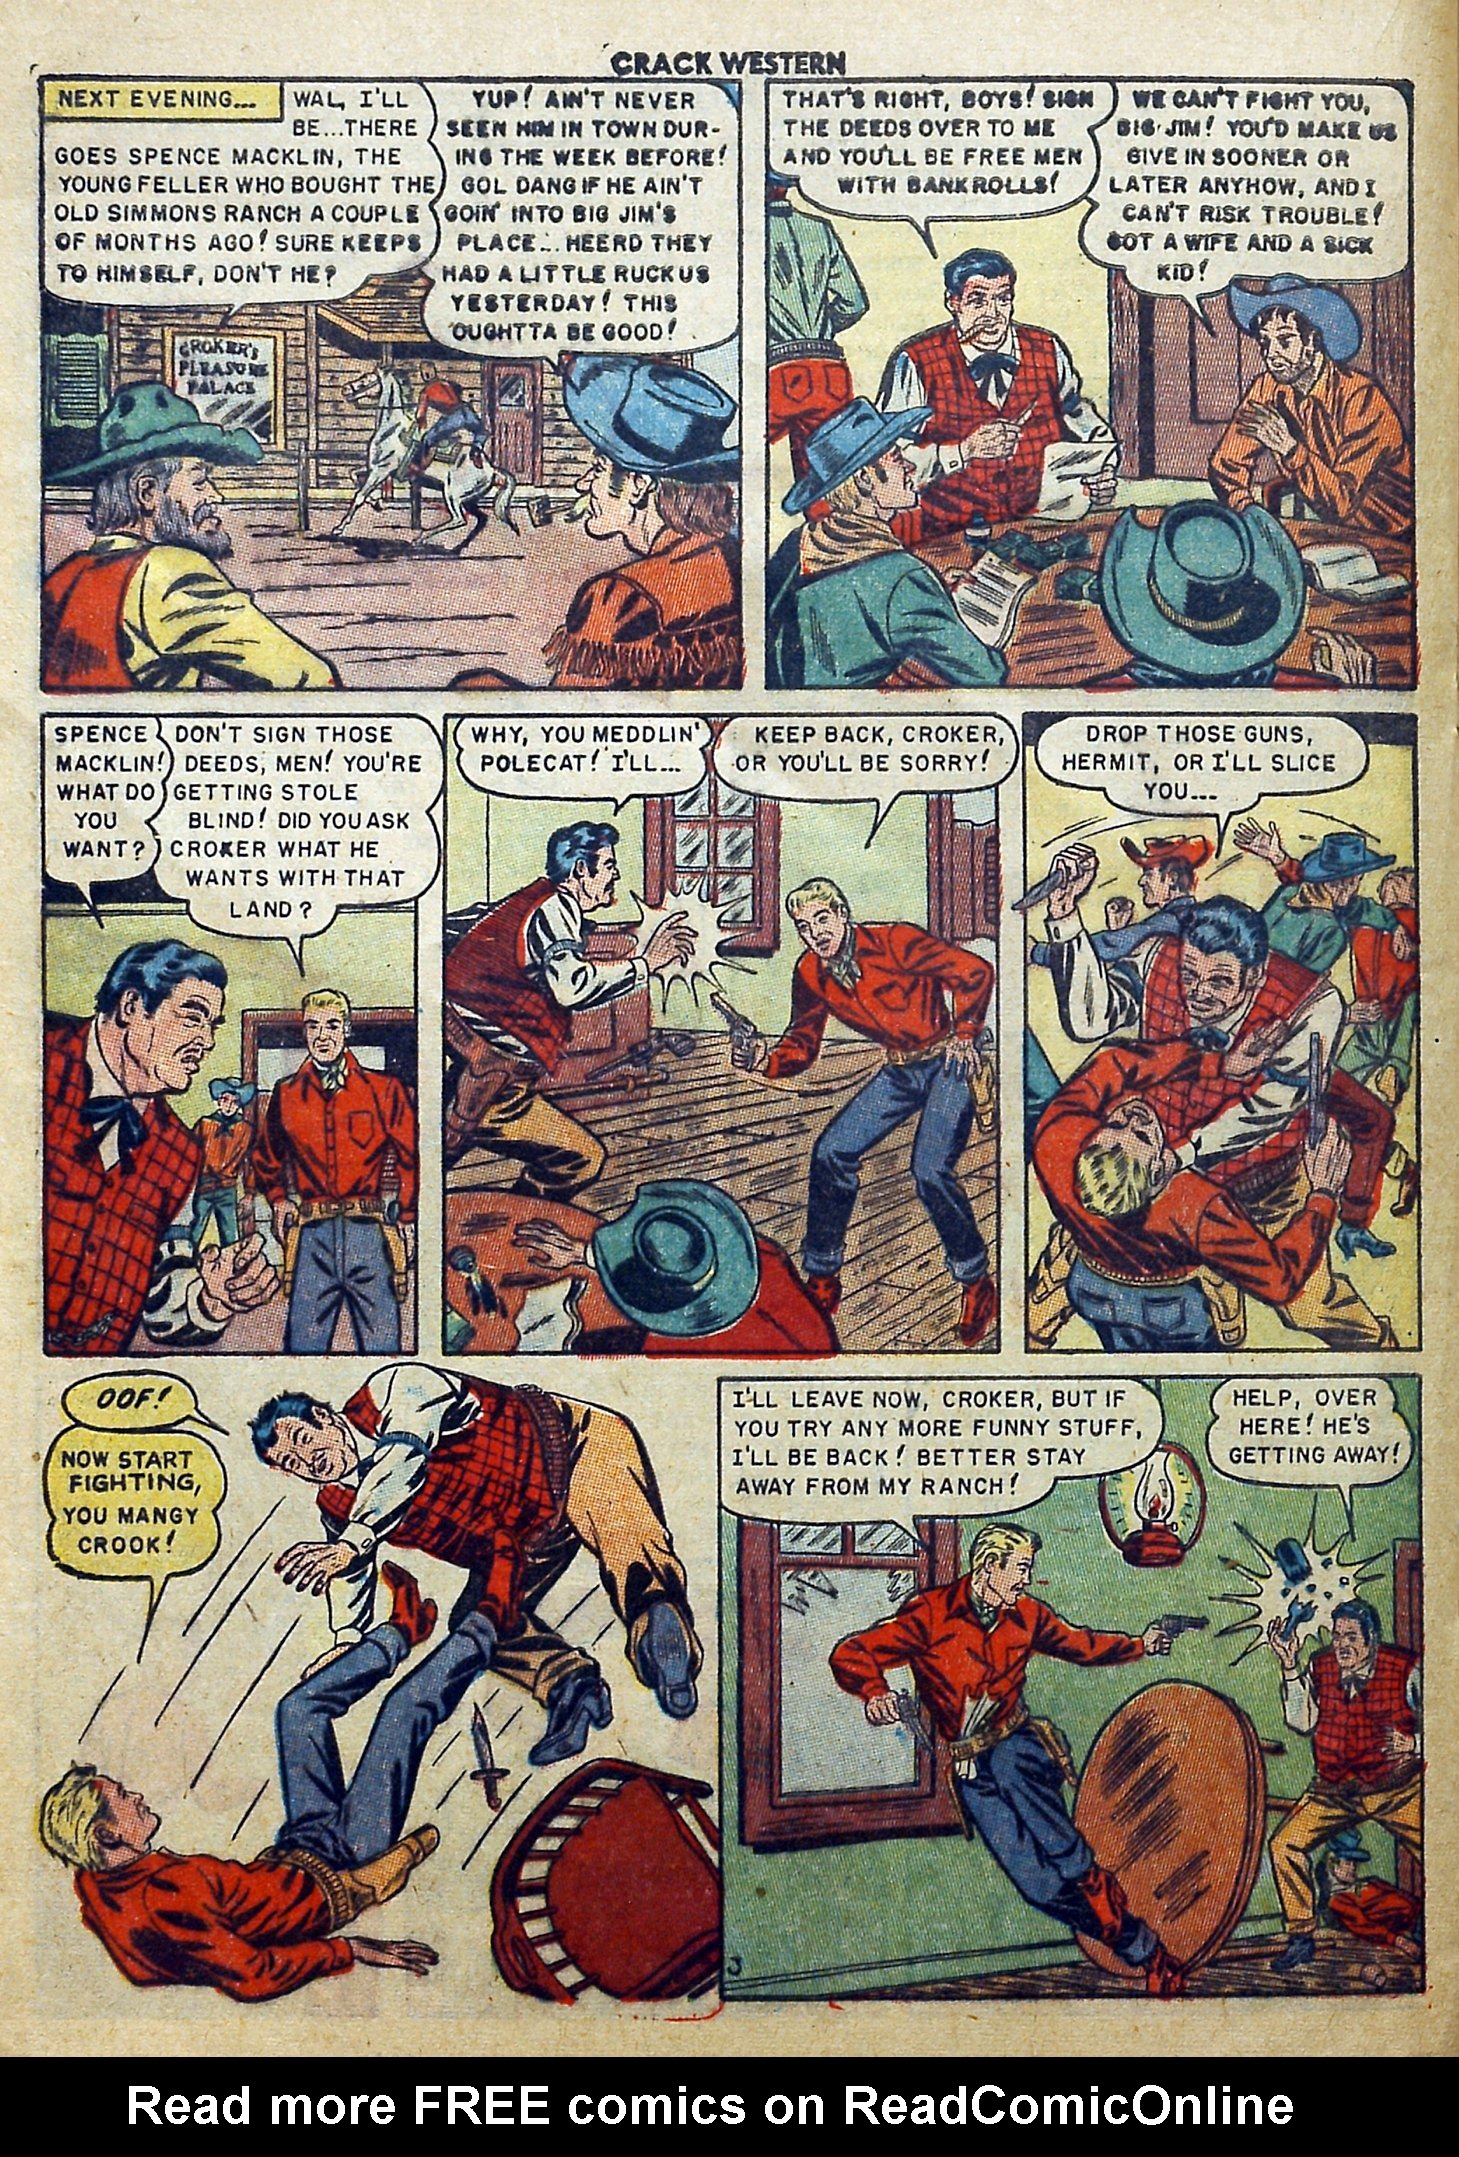 Read online Crack Western comic -  Issue #68 - 20